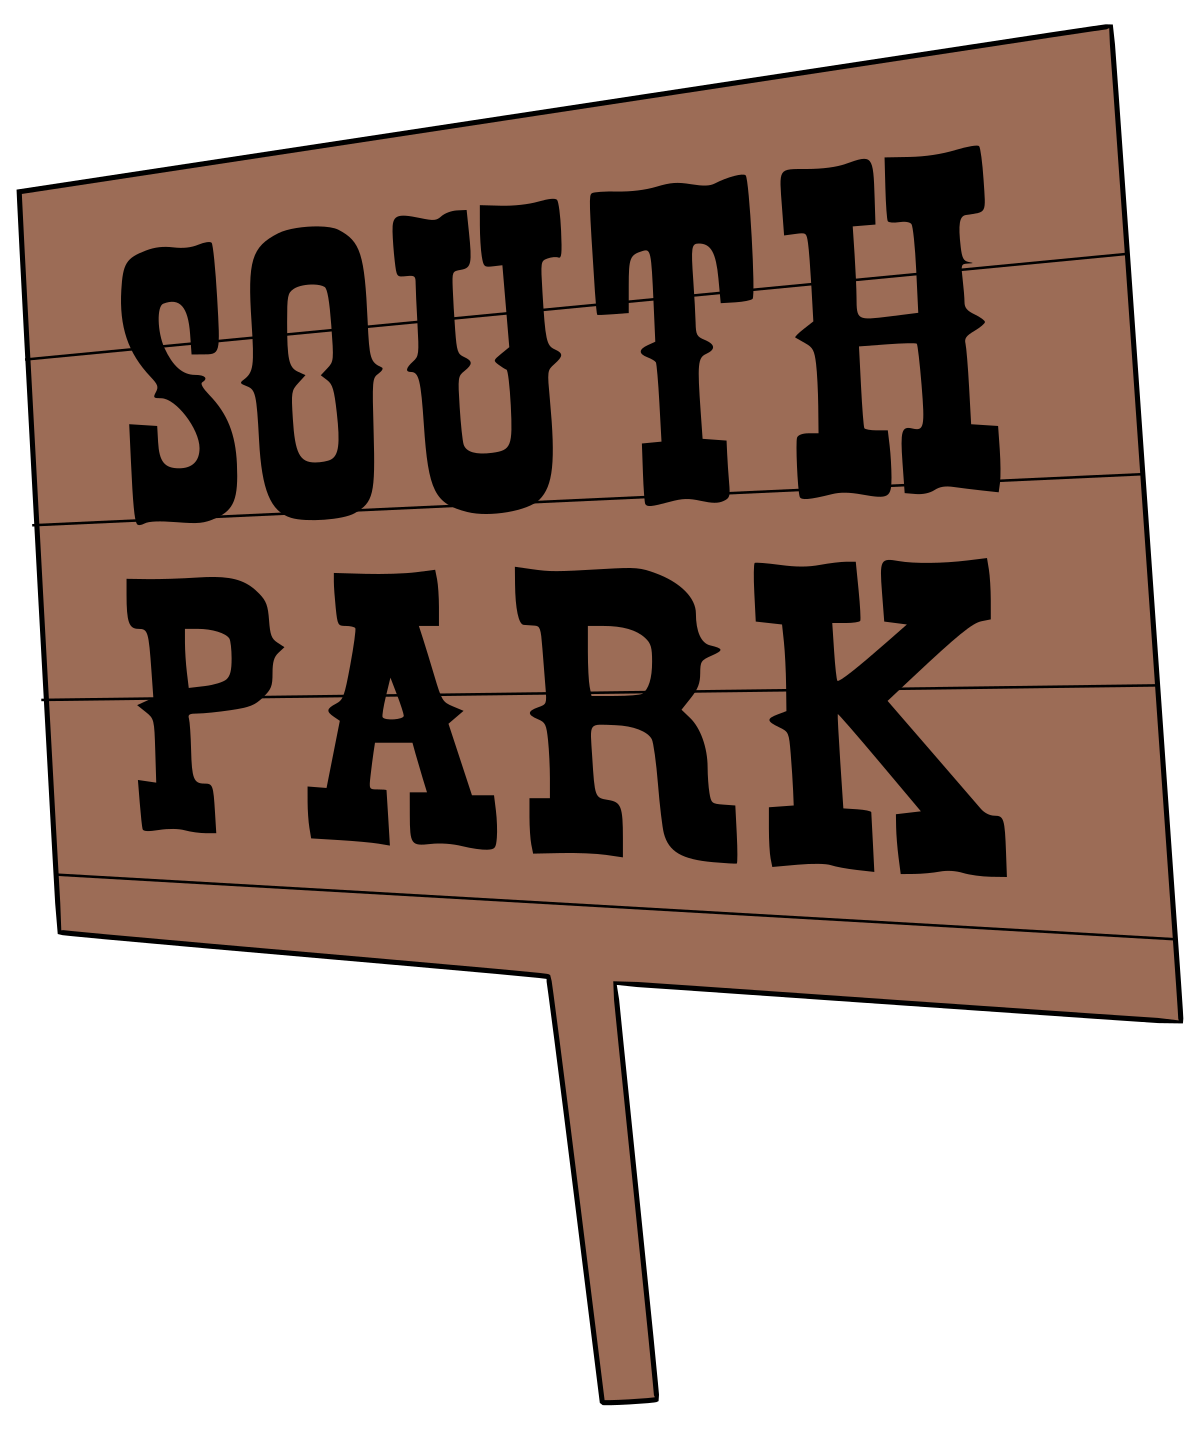 South Park Orgy Porn - List of South Park episodes - Wikipedia